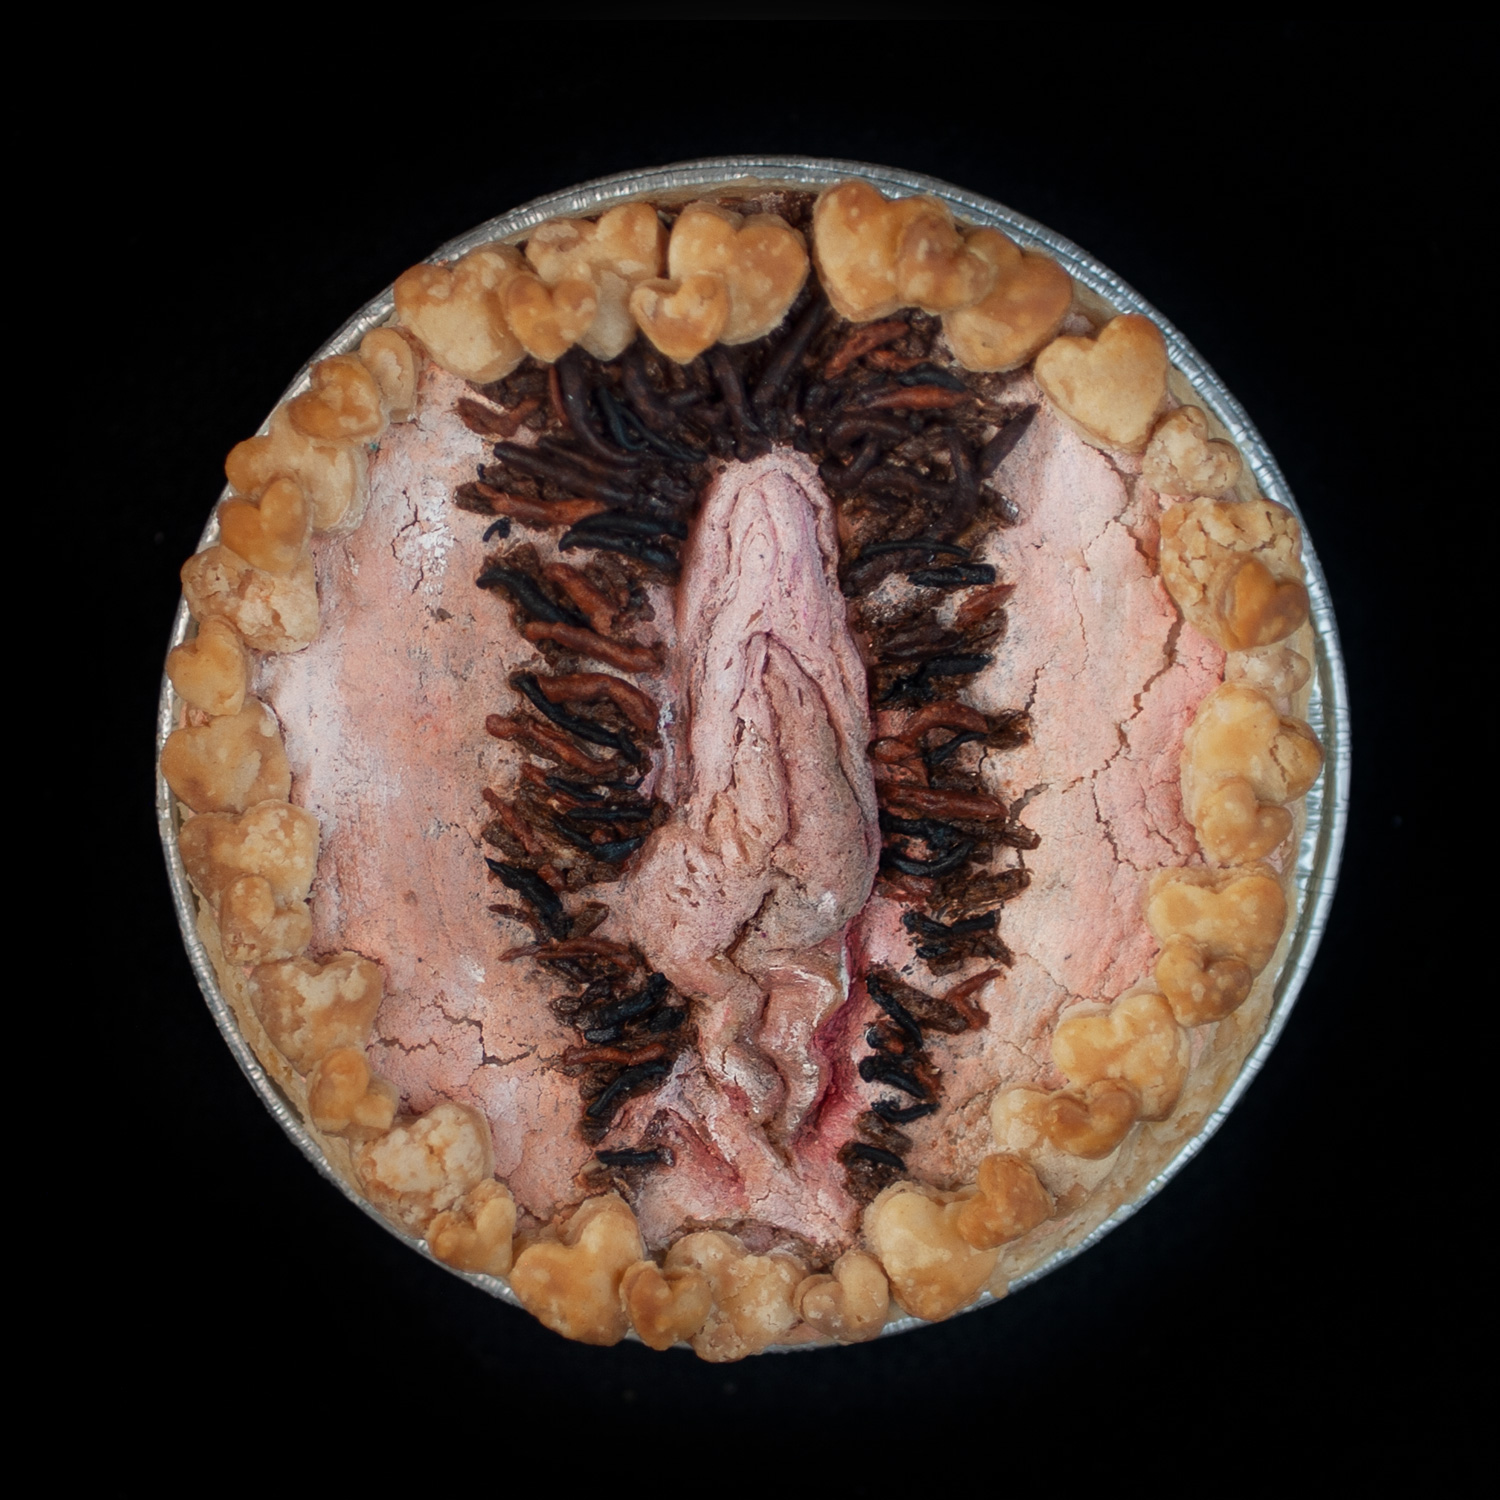 A baked vulva pie on a black background. The pie has brown pubic hair and is surrounded my pie crust hearts. The vulva art is painted to look like a realistic vulva.